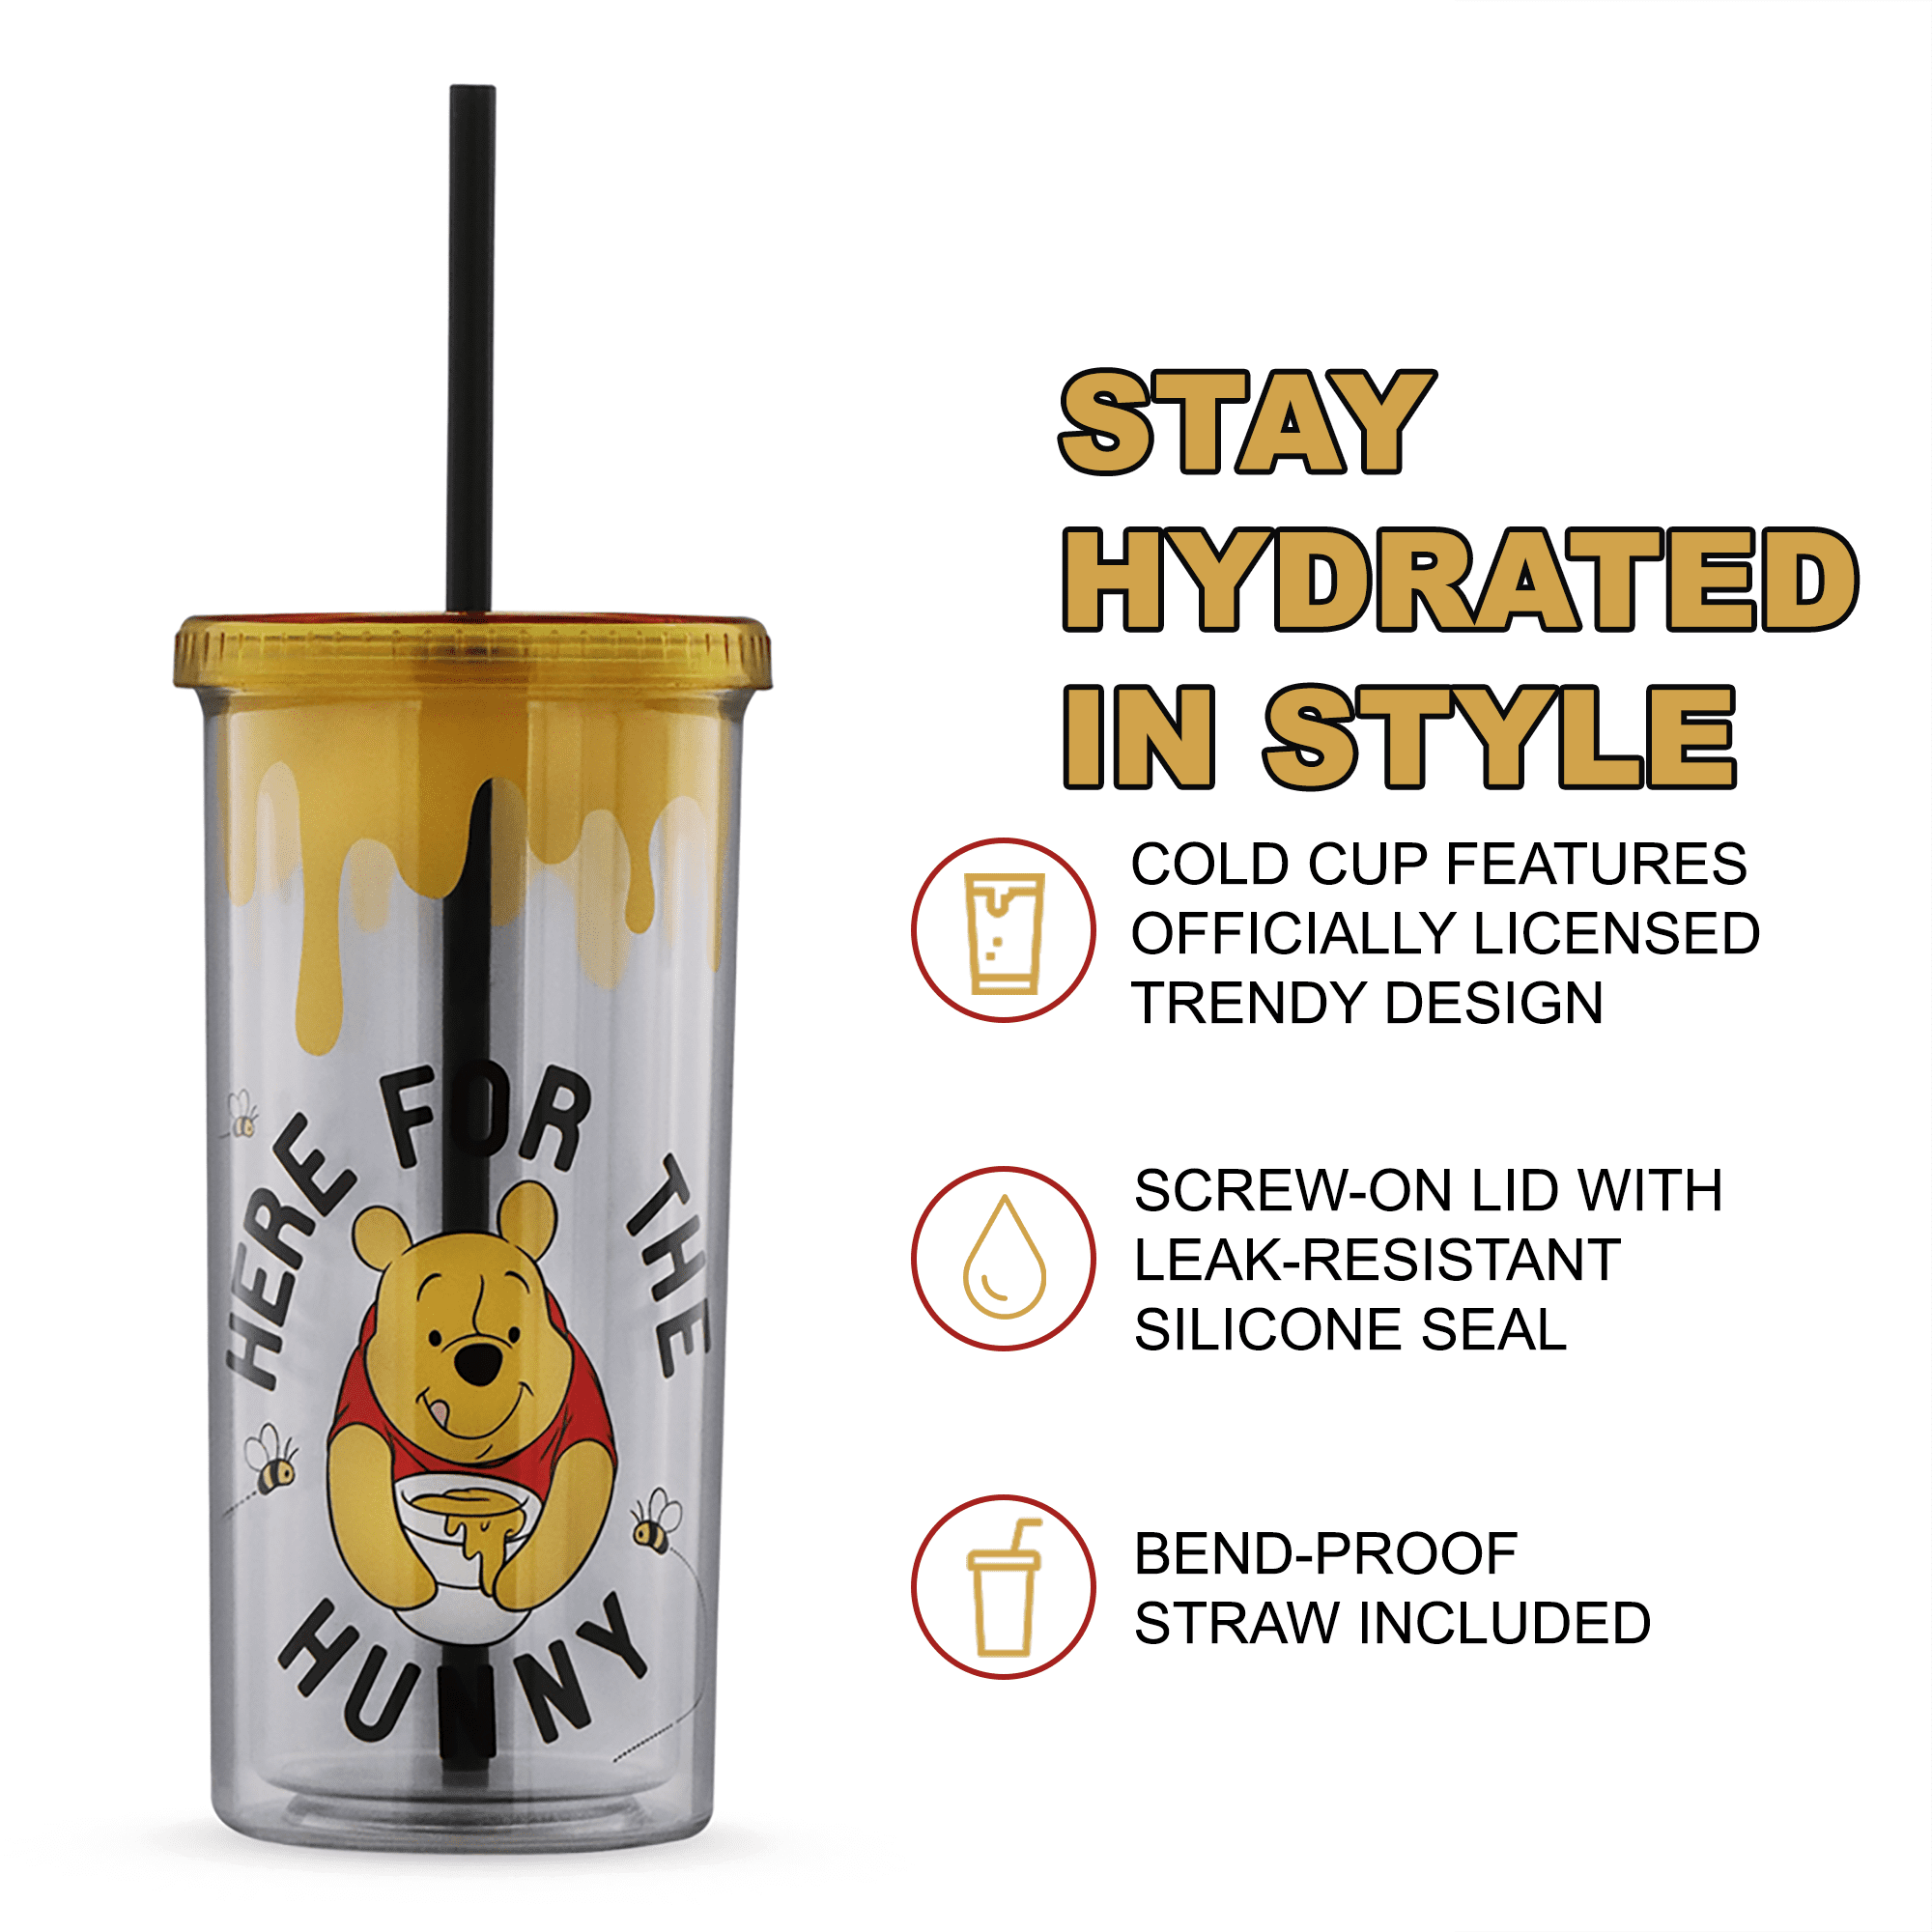 Silver Buffalo Winnie The Pooh Balloon Stainless Steel Tumbler With Straw